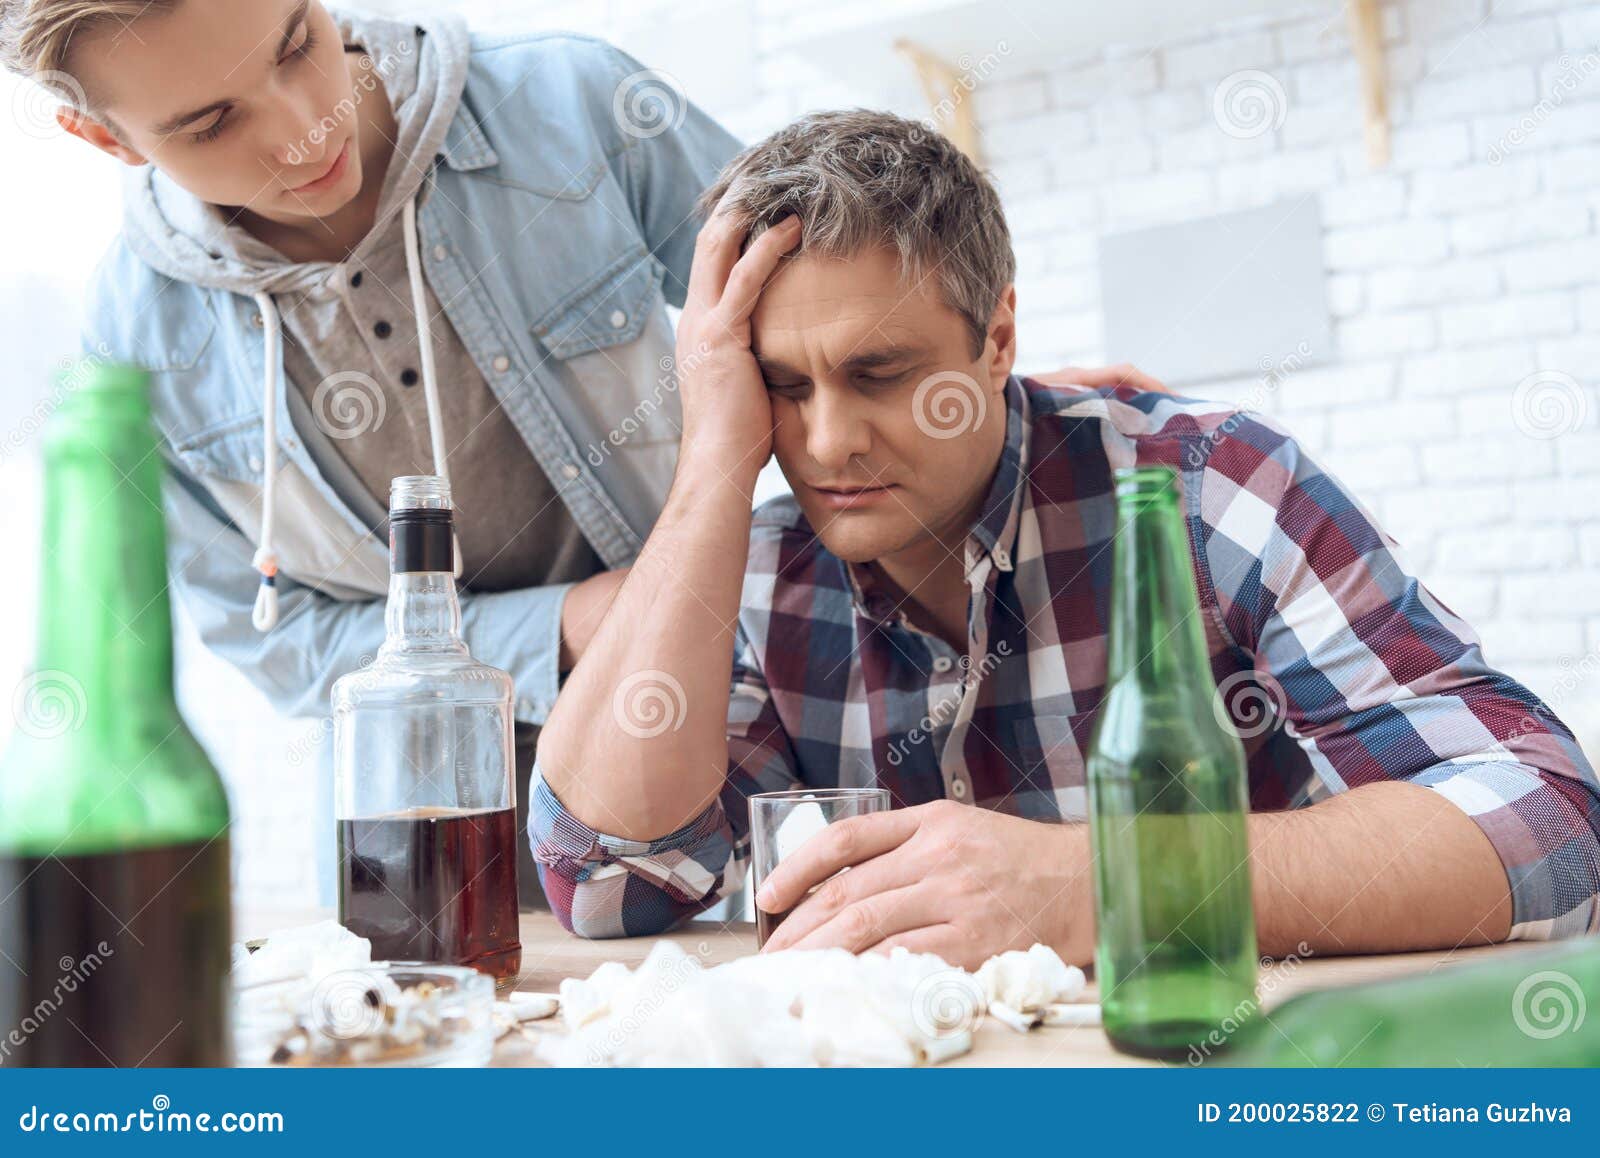 son-went-to-his-father-who-drinks-alcohol-table-alcoholic-man-sits-holds-glass-200025822.jpg